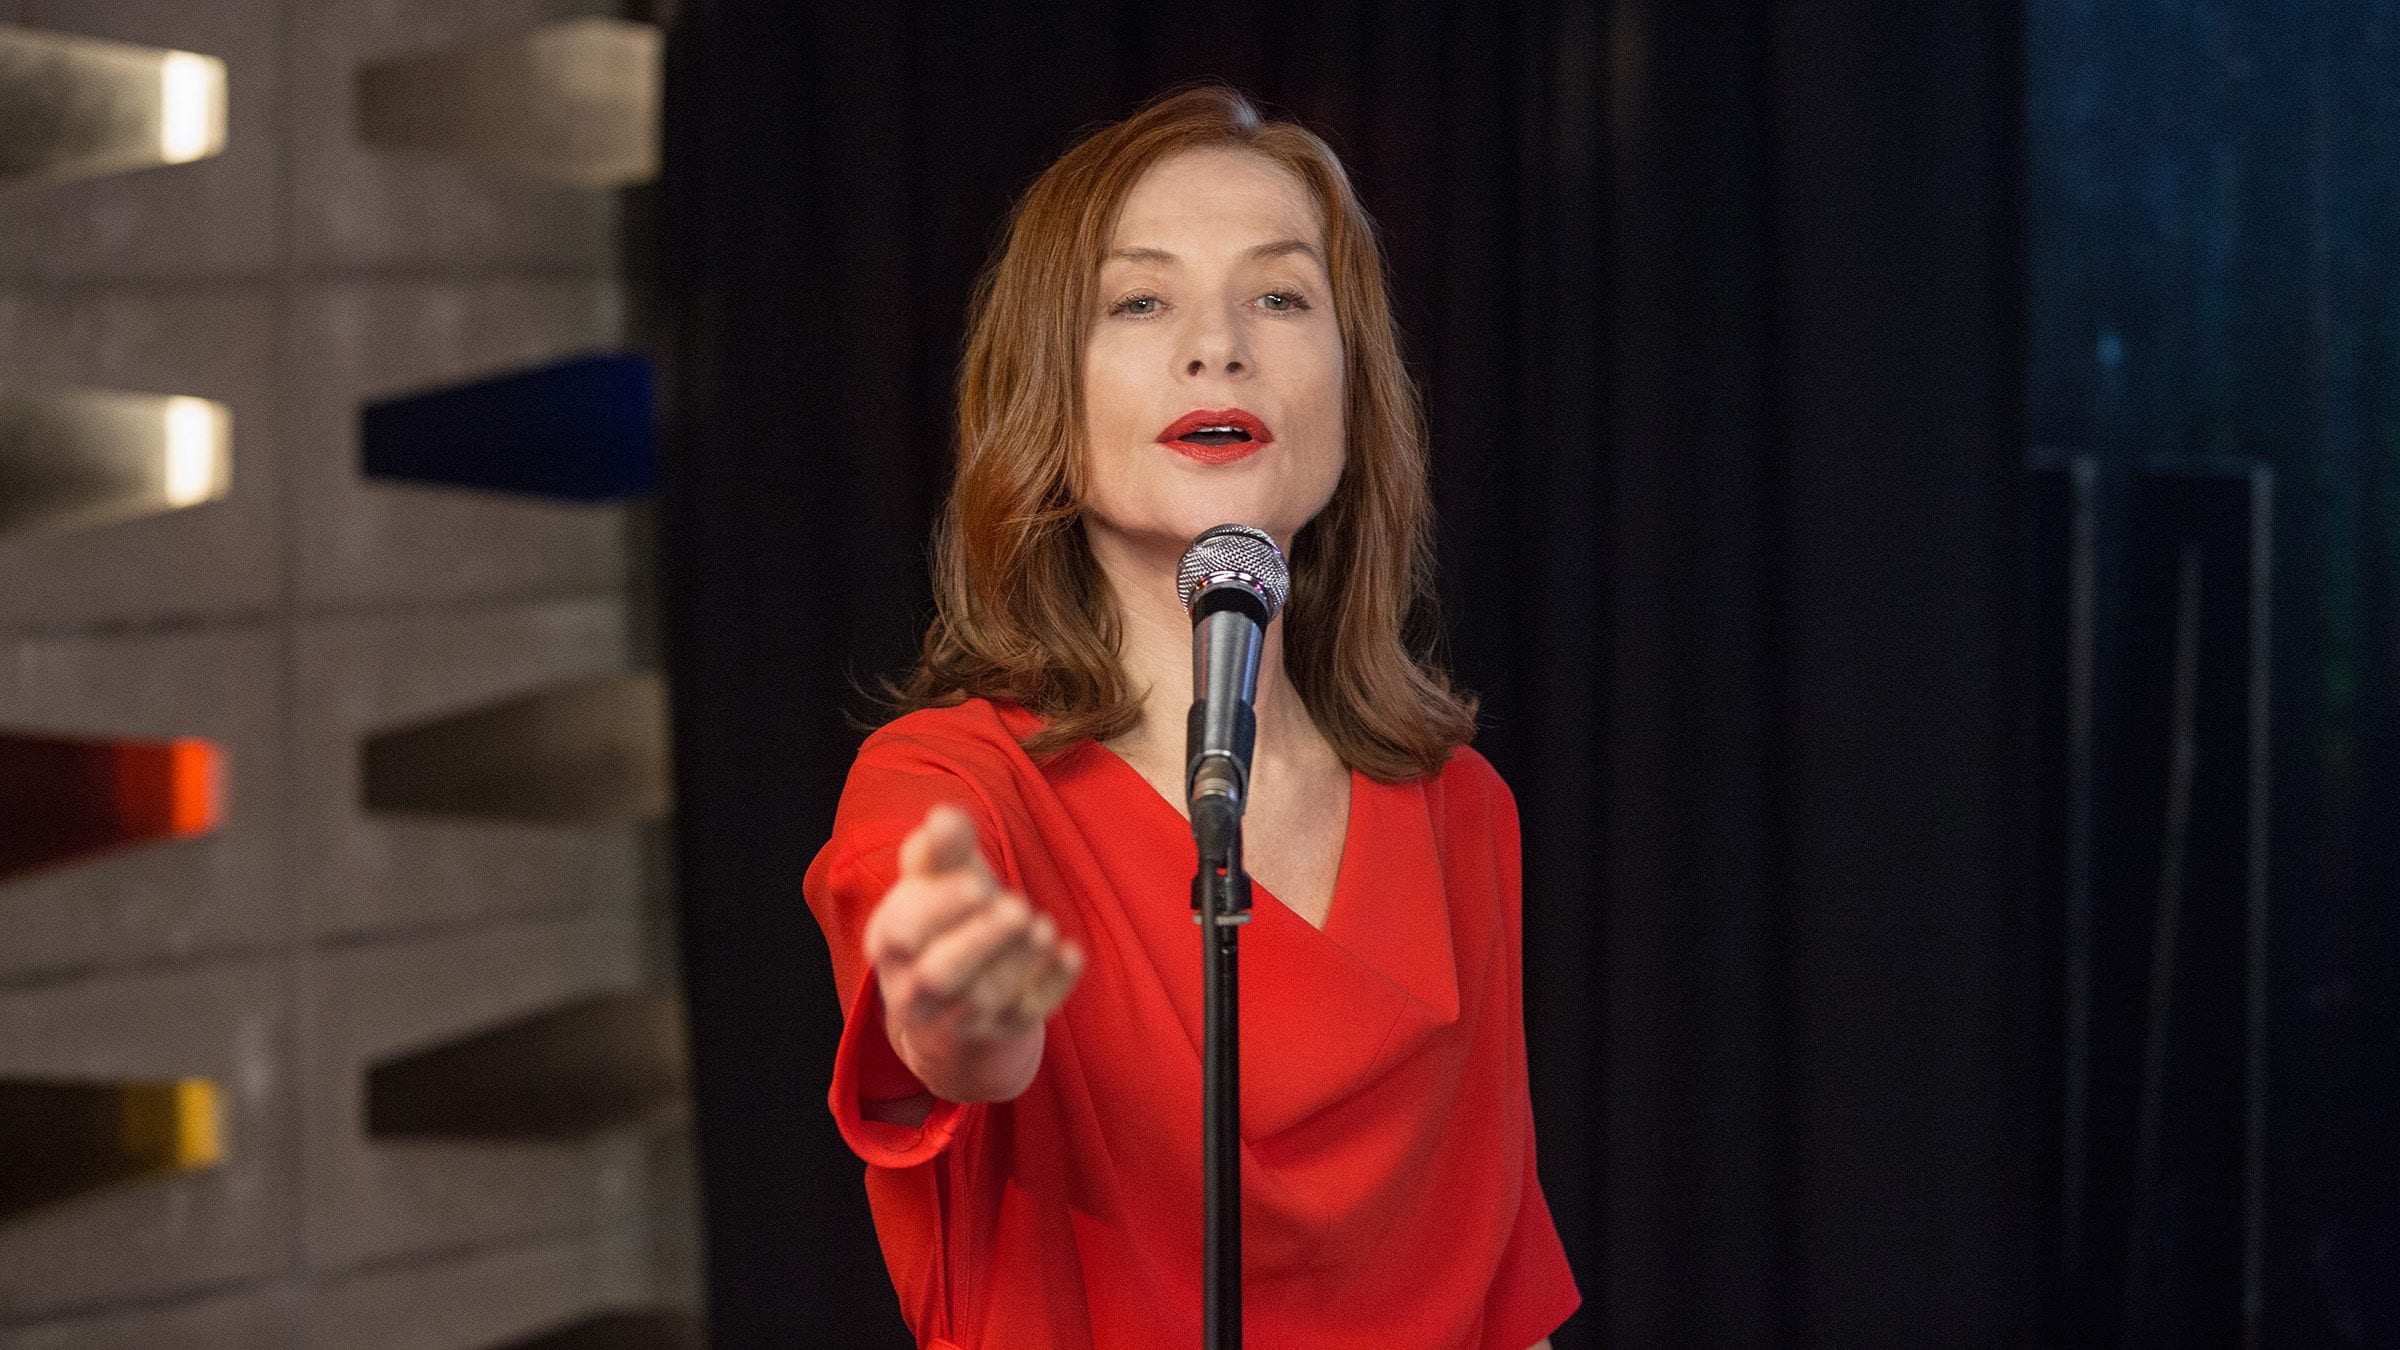 Strand Releasing has secured North American distribution rights to Bavo Defurne’s 'Souvenir', starring Oscar-nominated actress Isabelle Huppert.